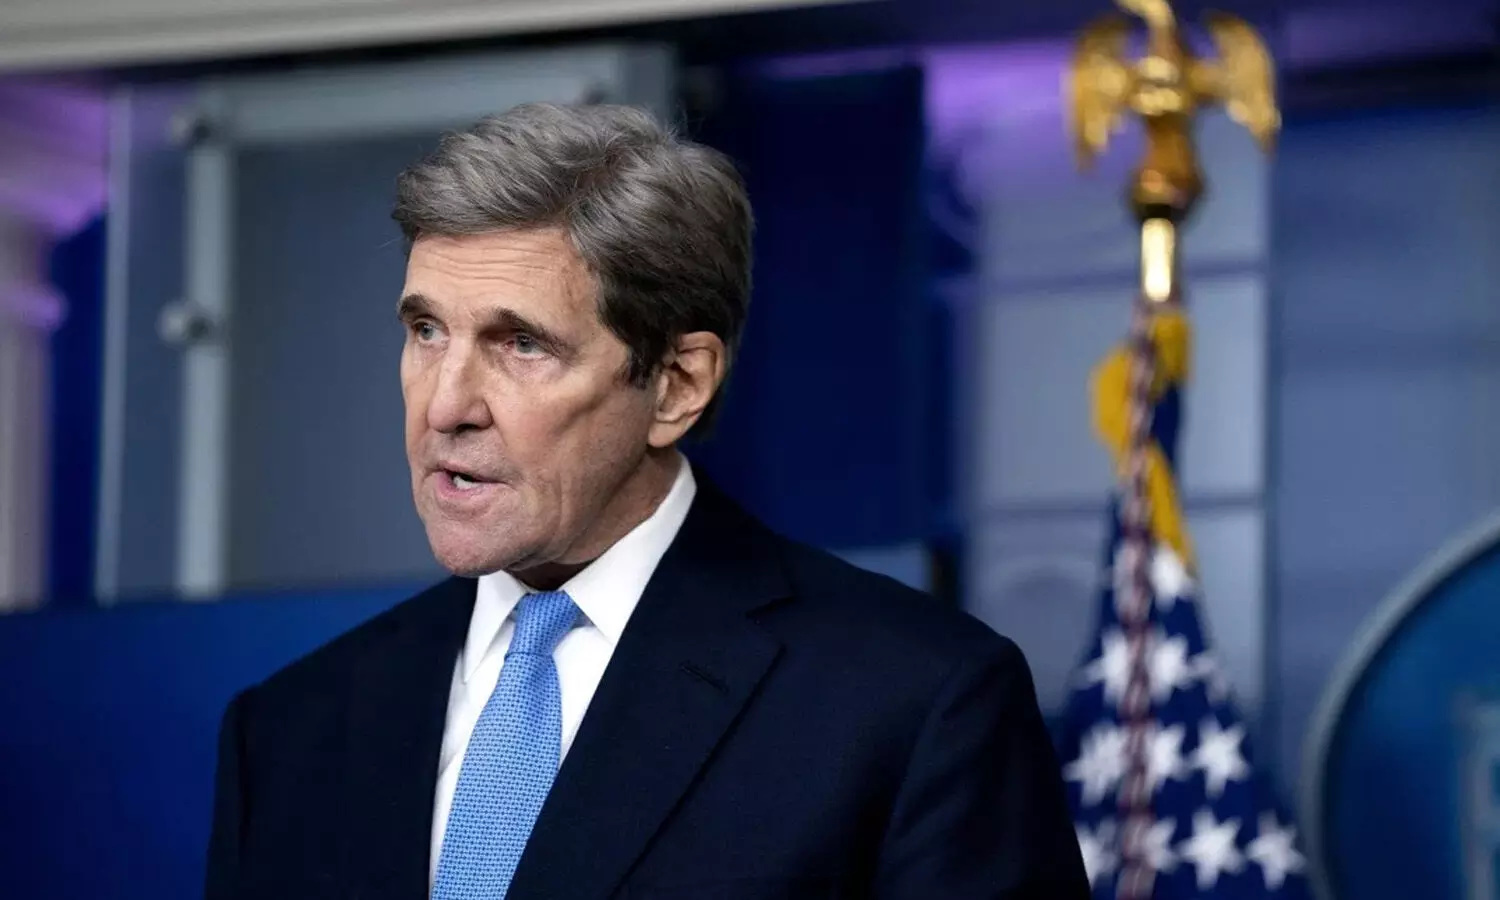 John Kerry in India for climate talks from September 12 to 14